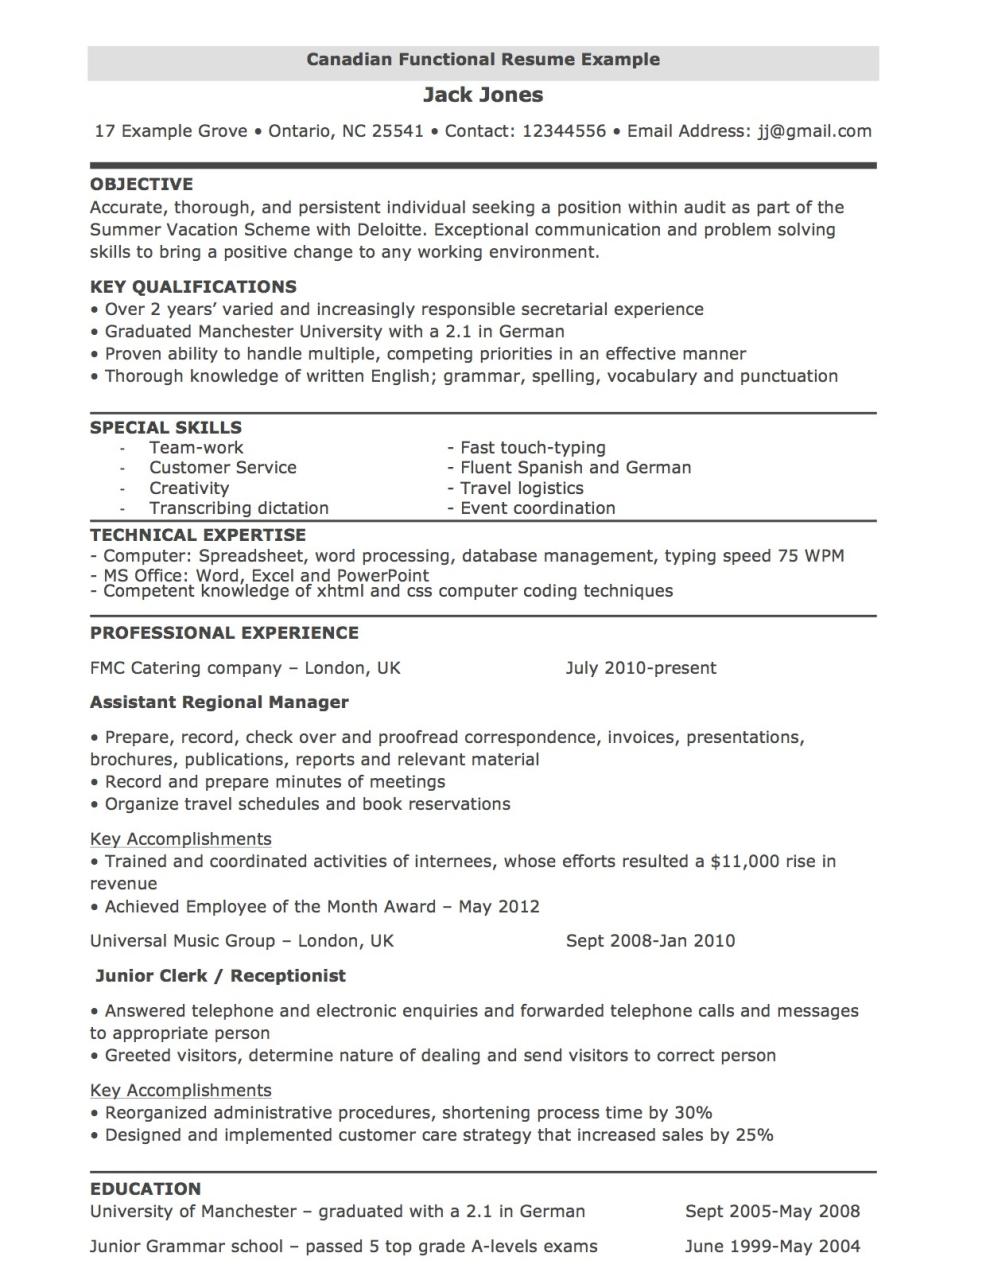 Functional resume for Canada Joblers